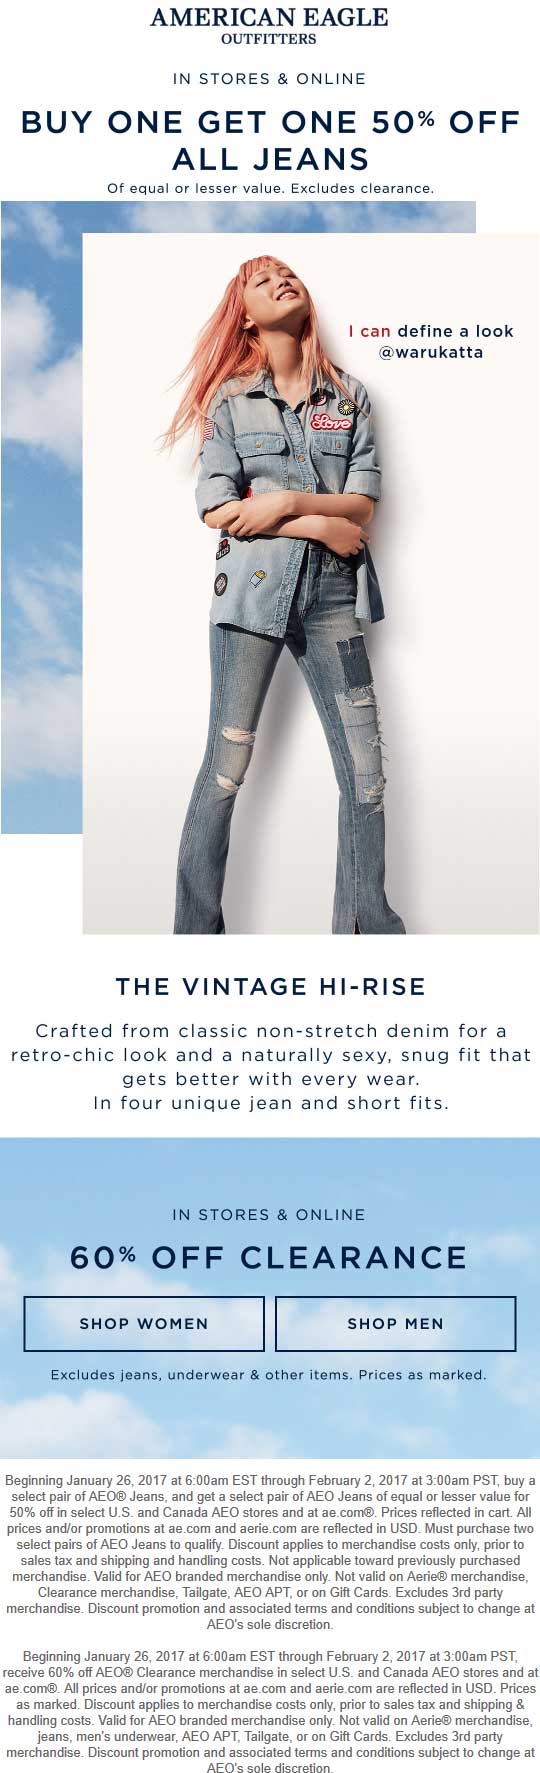 American Eagle Outfitters Coupon April 2024 Second pair jeans 50% off + 60% off clearance at American Eagle Outfitters, ditto online